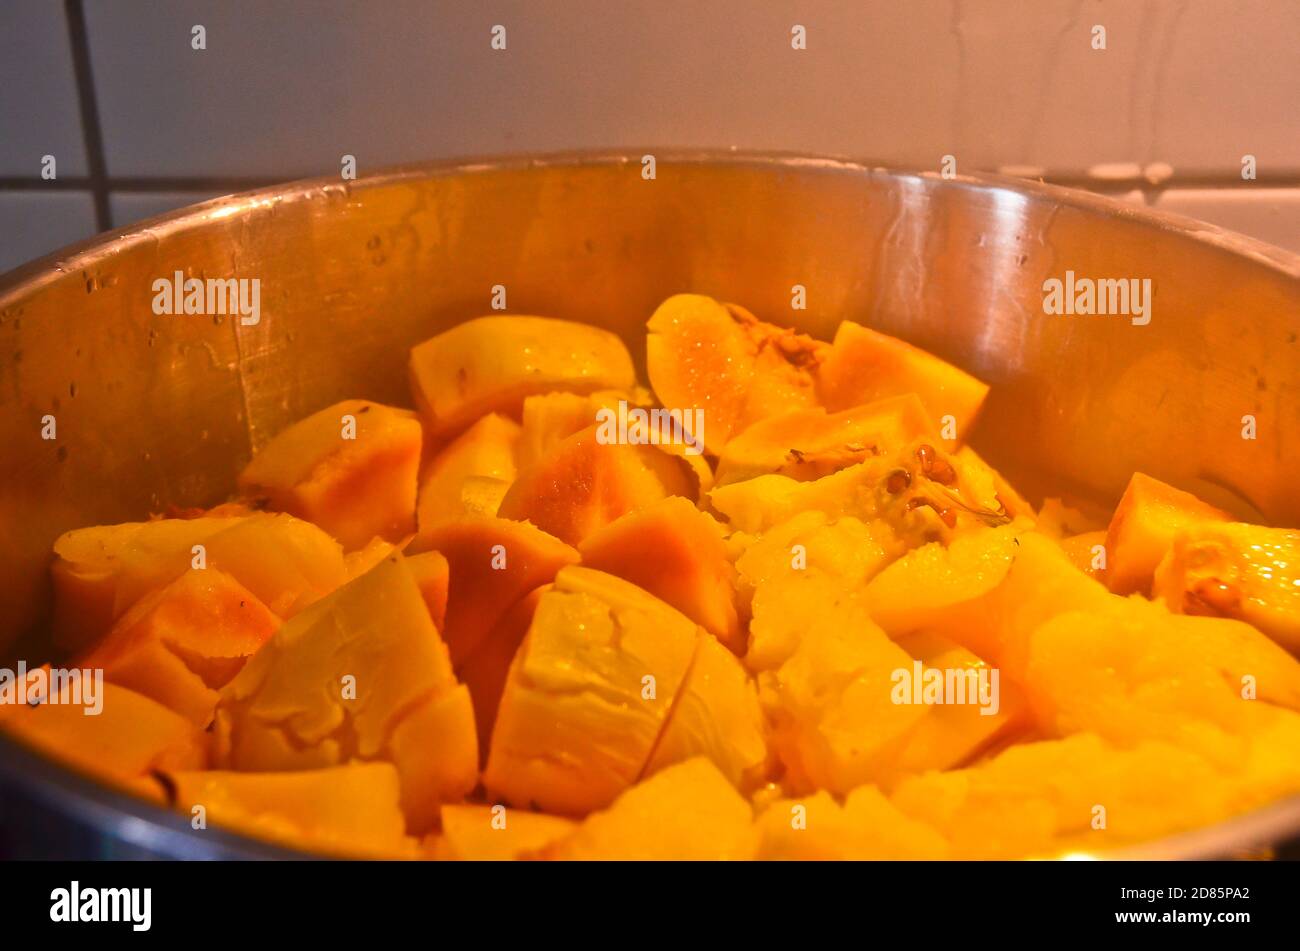 https://c8.alamy.com/comp/2D85PA2/ripe-yellow-and-orange-quinces-in-a-big-premium-steel-pot-a-juice-extractor-to-cook-some-delicious-juice-2D85PA2.jpg